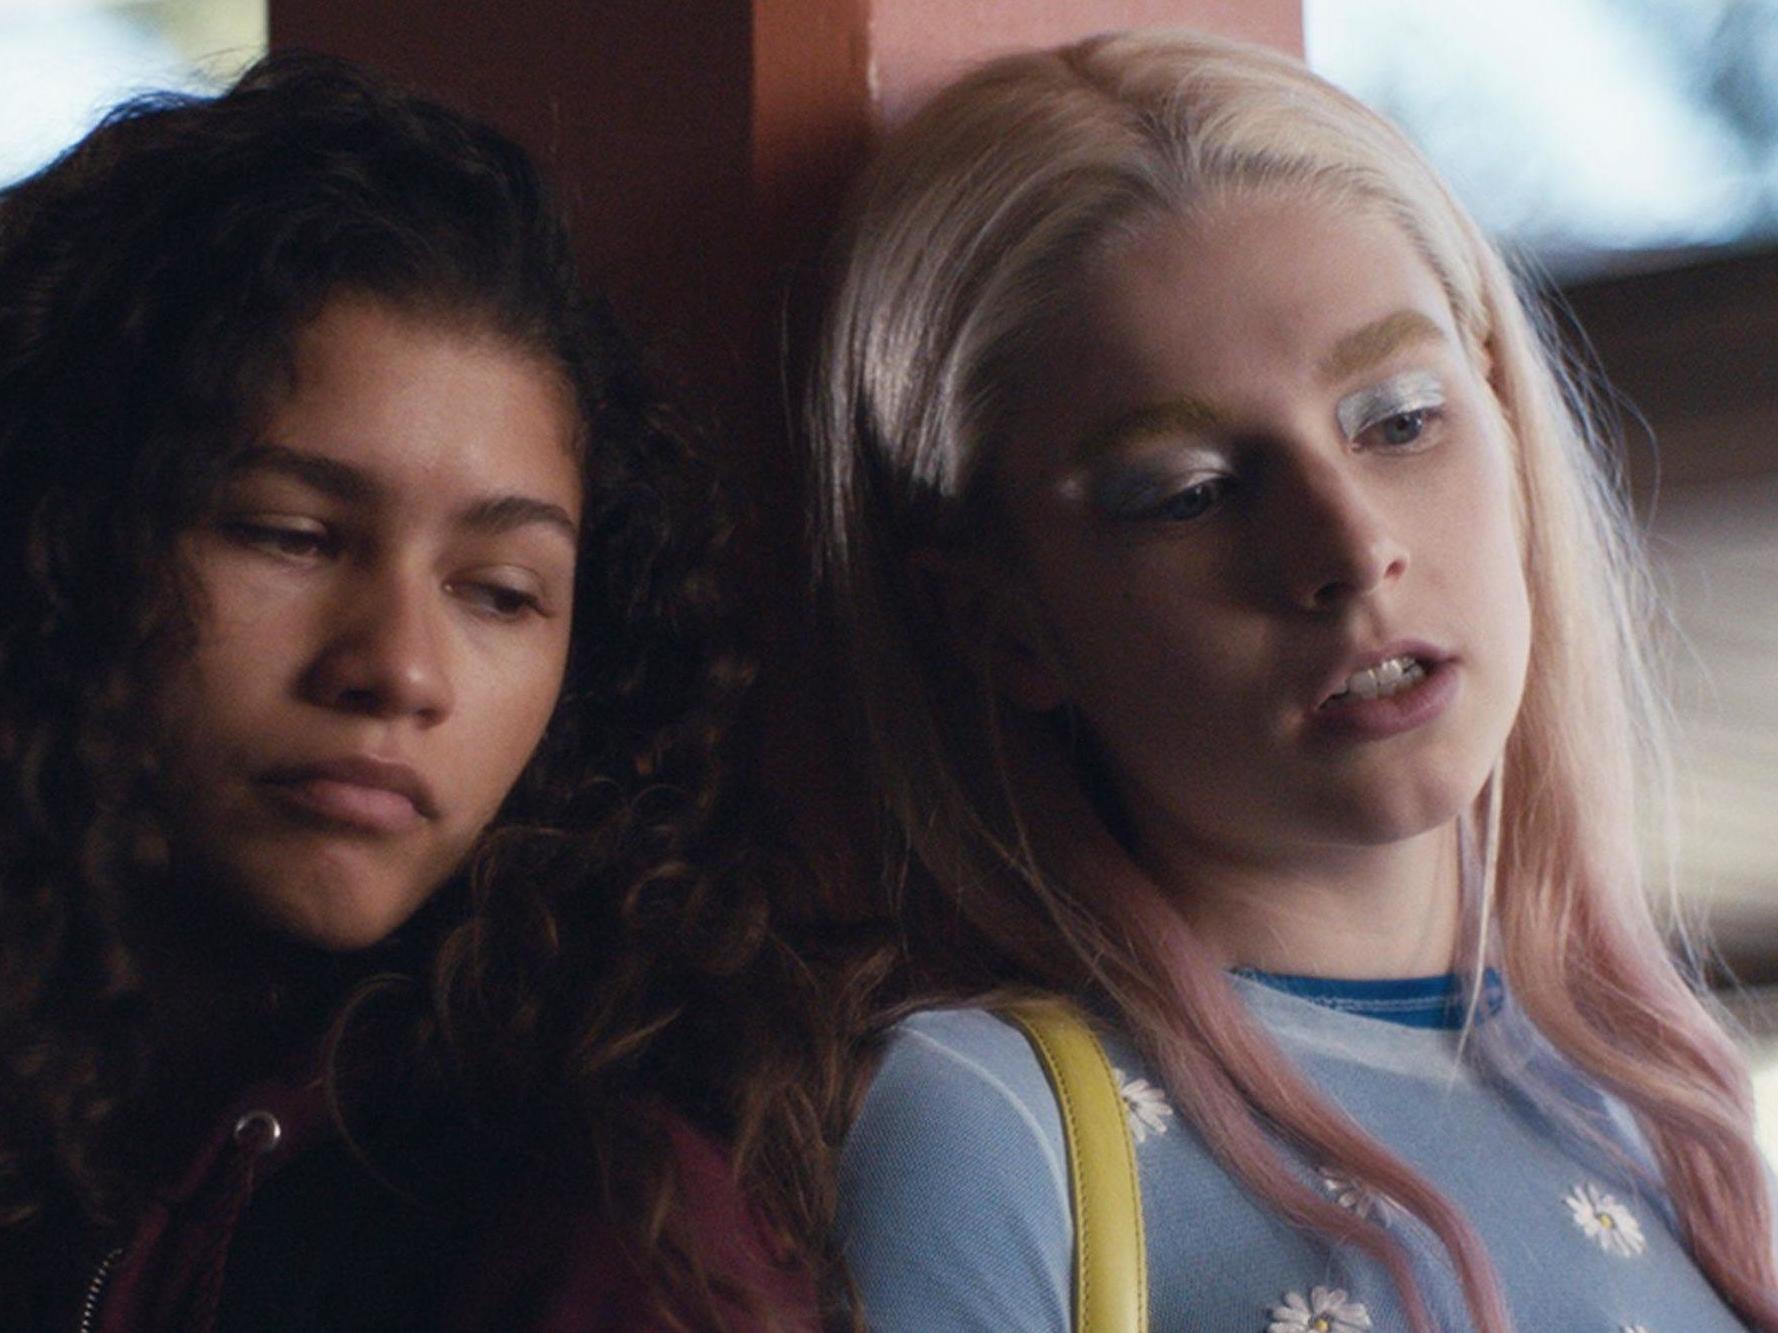 There has been a resurgence in people mimicking makeup styles from the TV show ‘Euphoria’